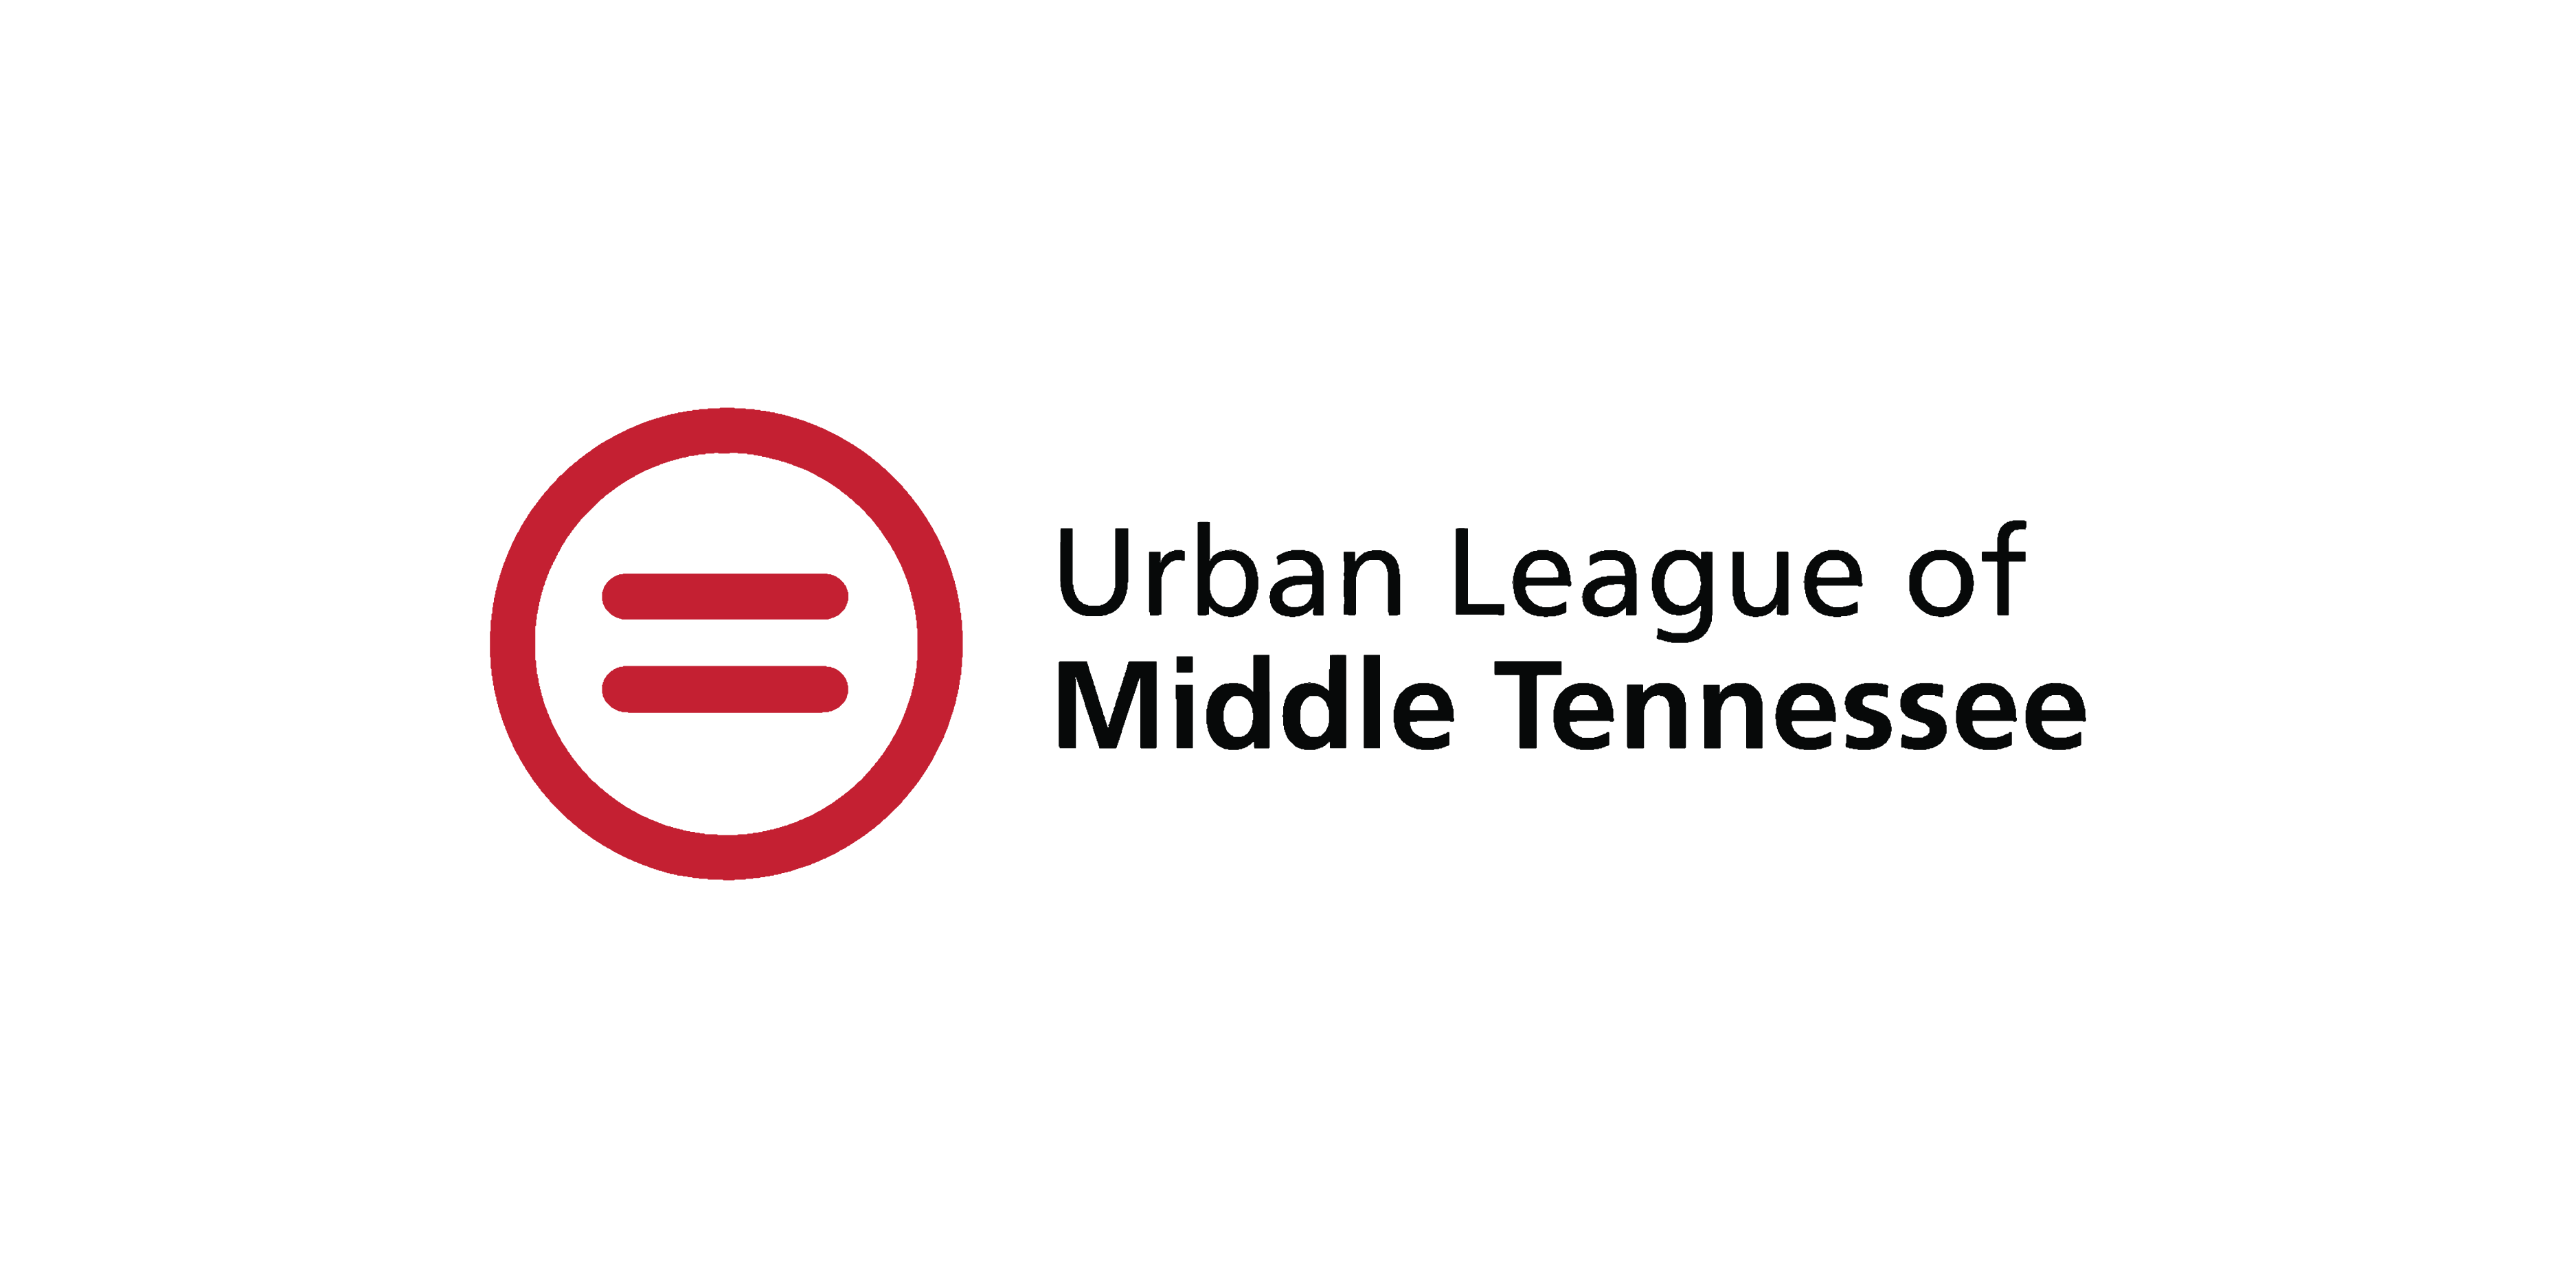 Urban League of Middle Tennessee